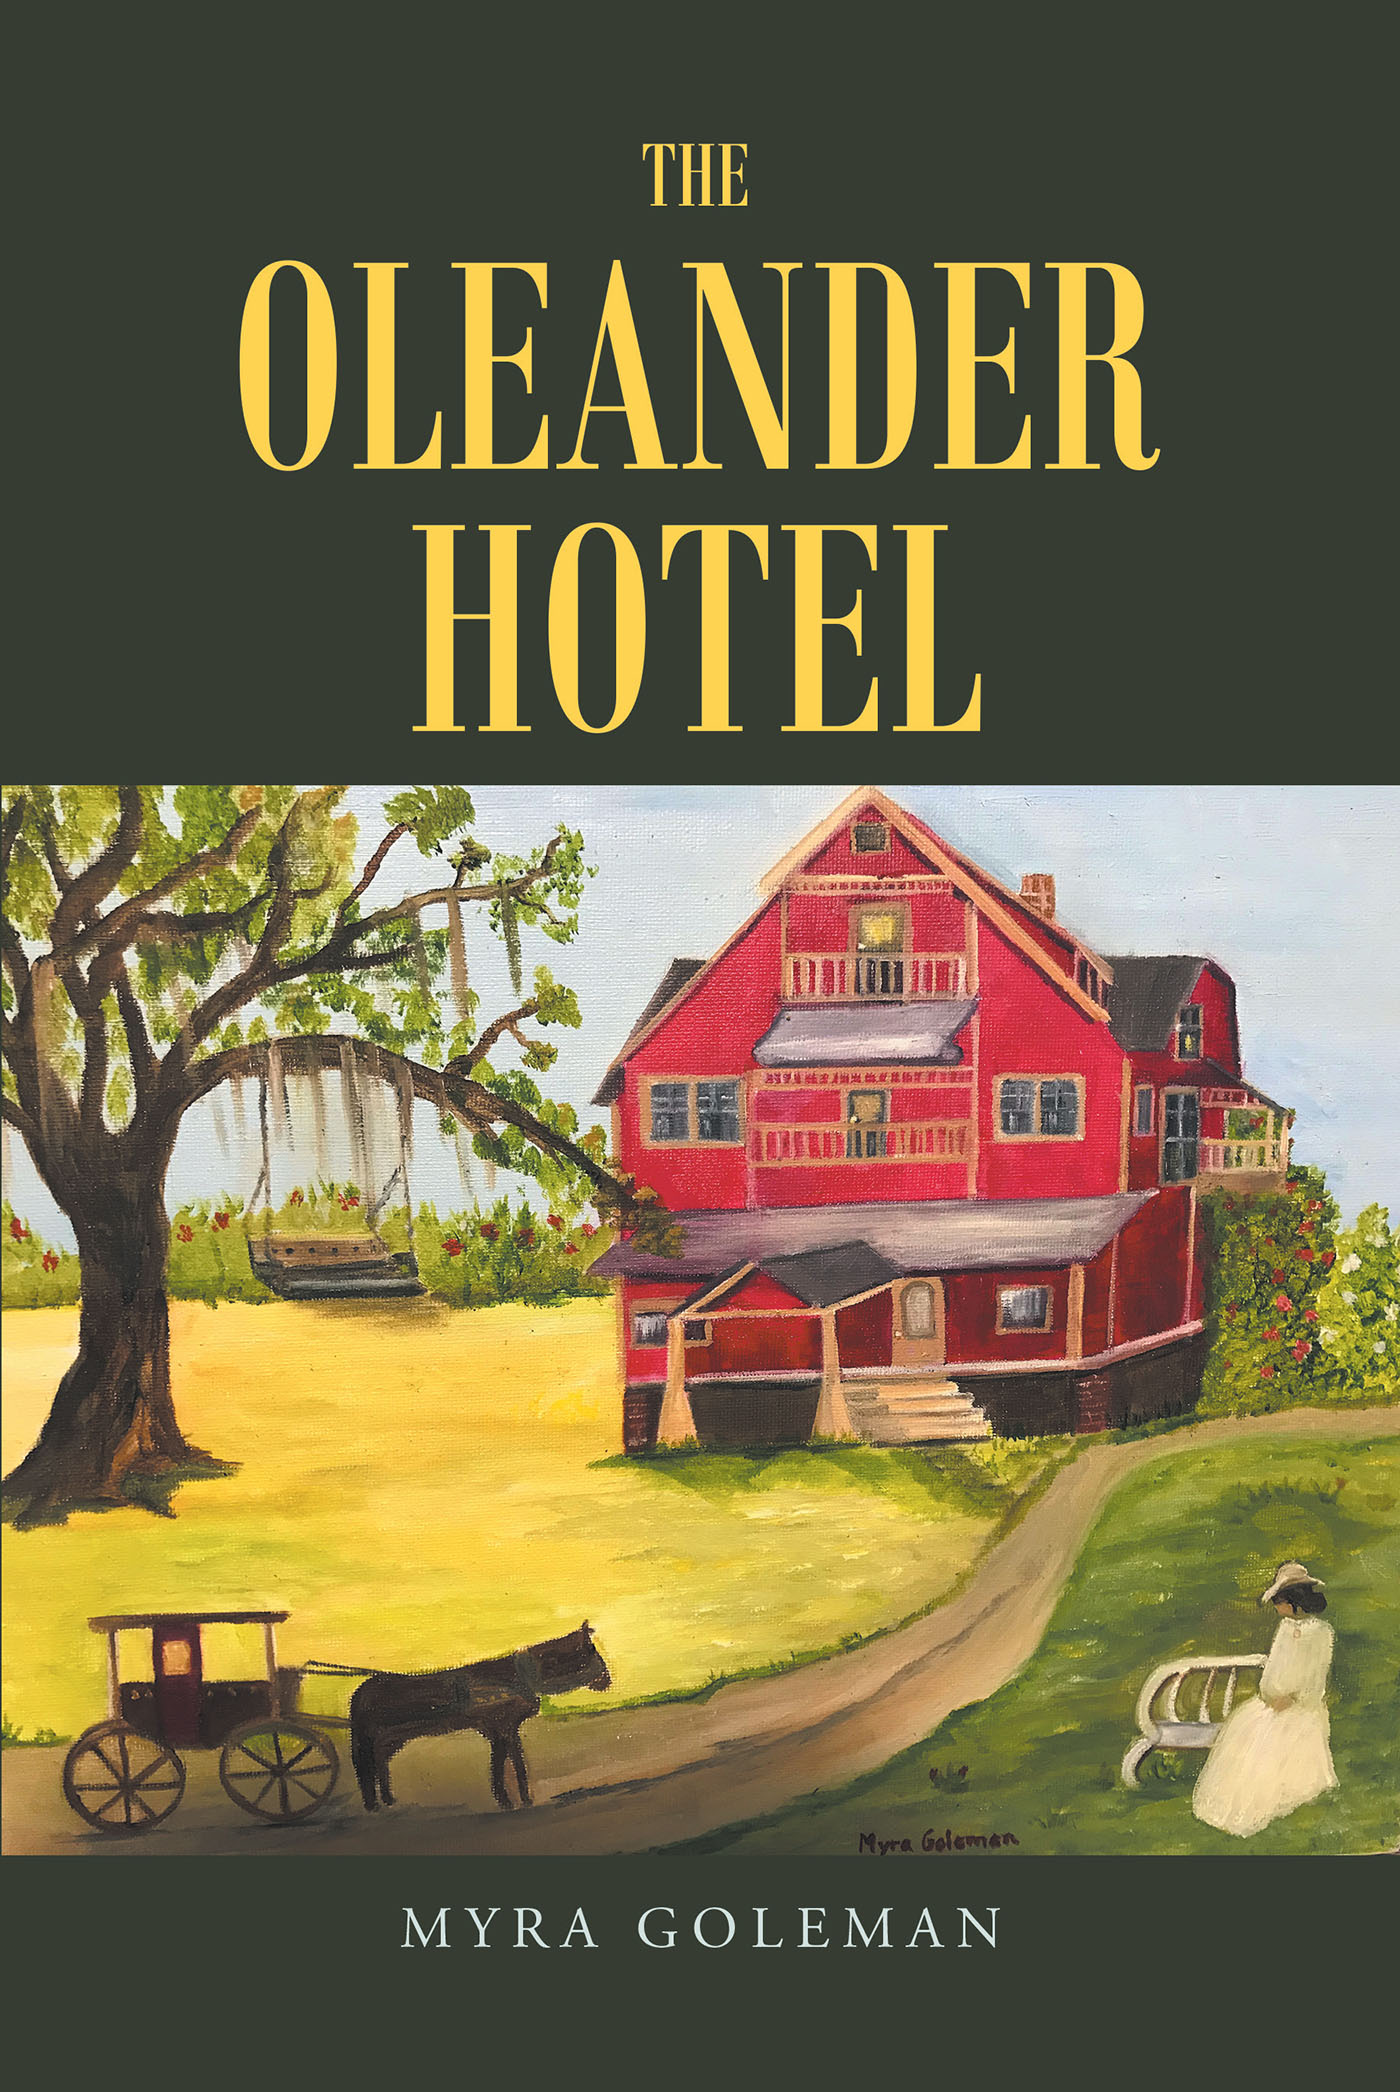 Author Myra Goleman’s New Book, "The Oleander Hotel," is a Heartwarming Story That Centers Around a Young Girl Who Lands Her Dream Job at the Gorgeous Oleander Hotel